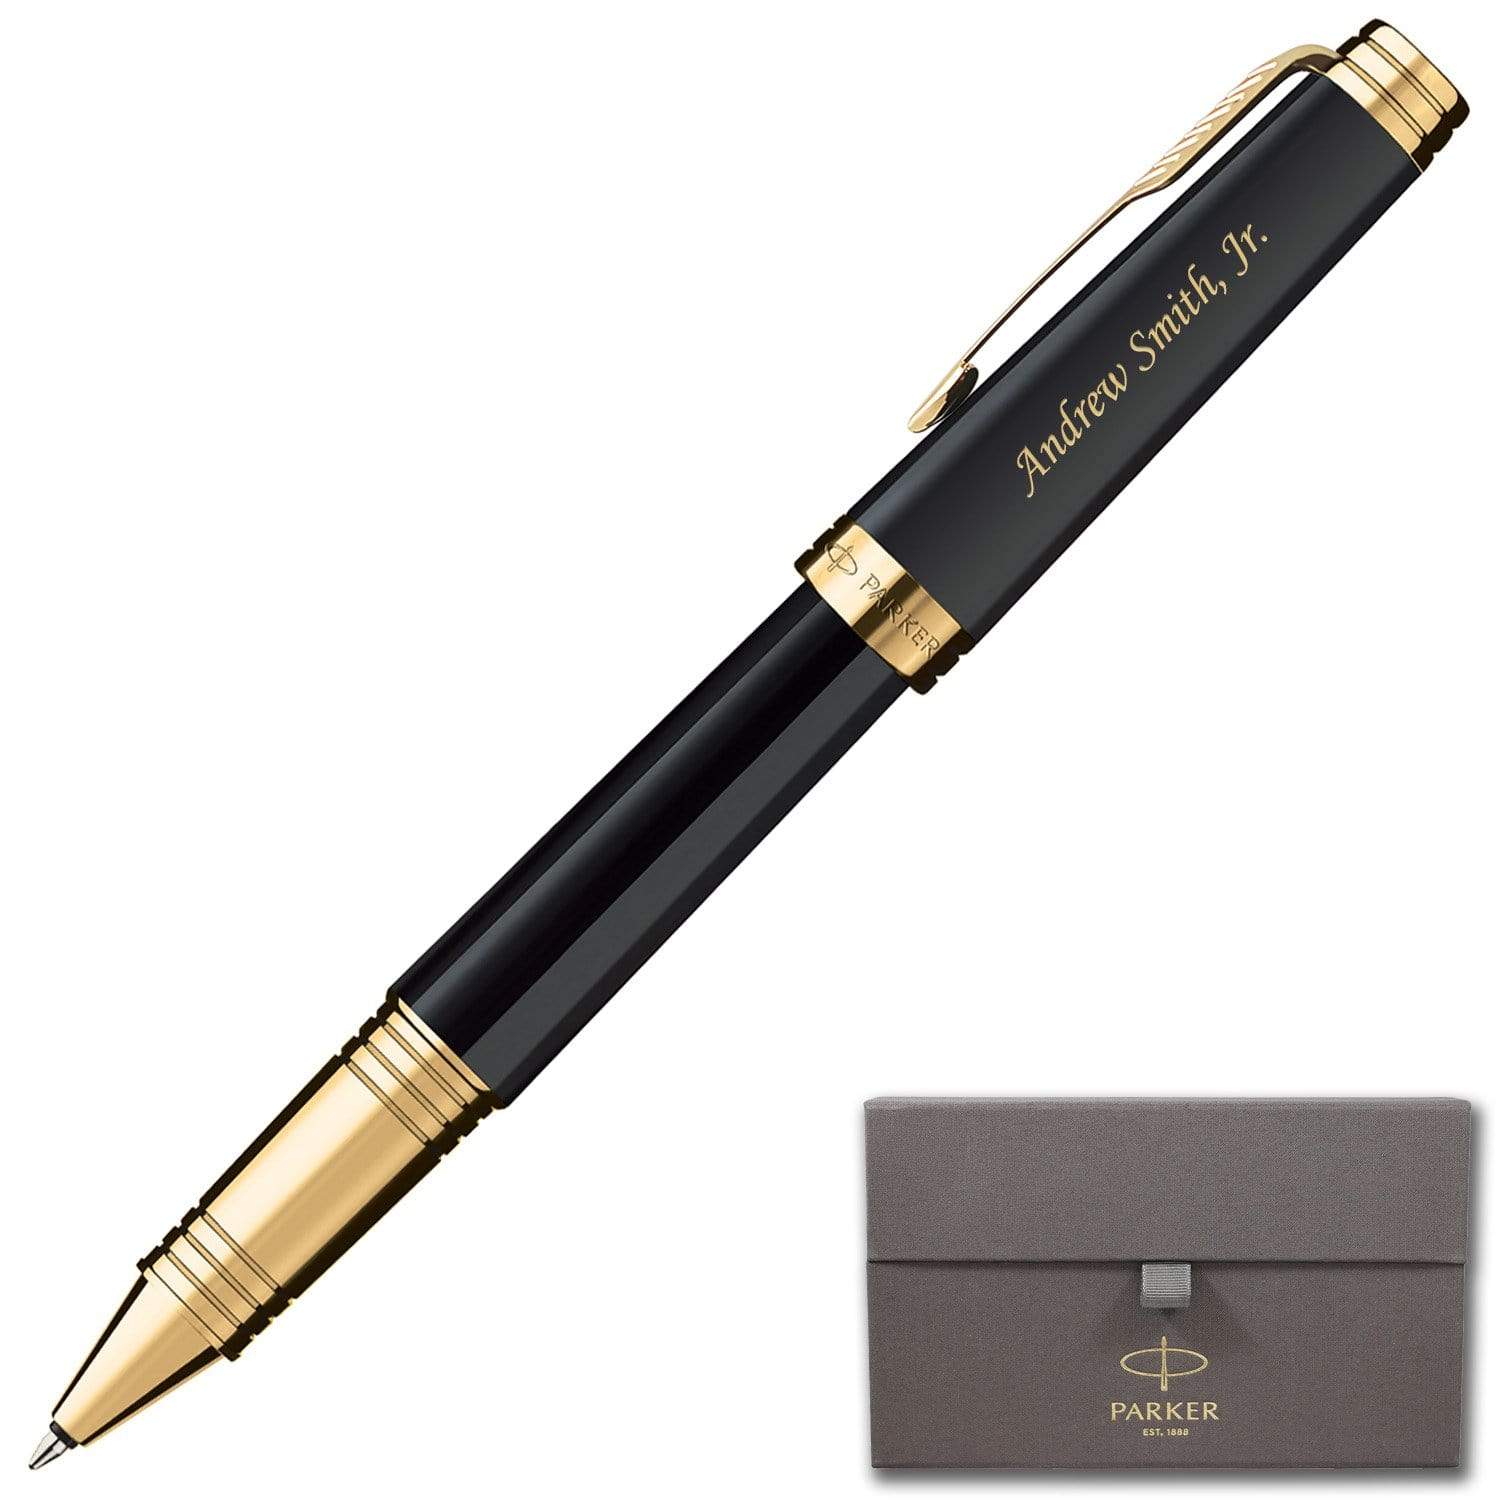 Personalized Parker Premier Rollerball: another incredible Father's Day Gift Pen choice